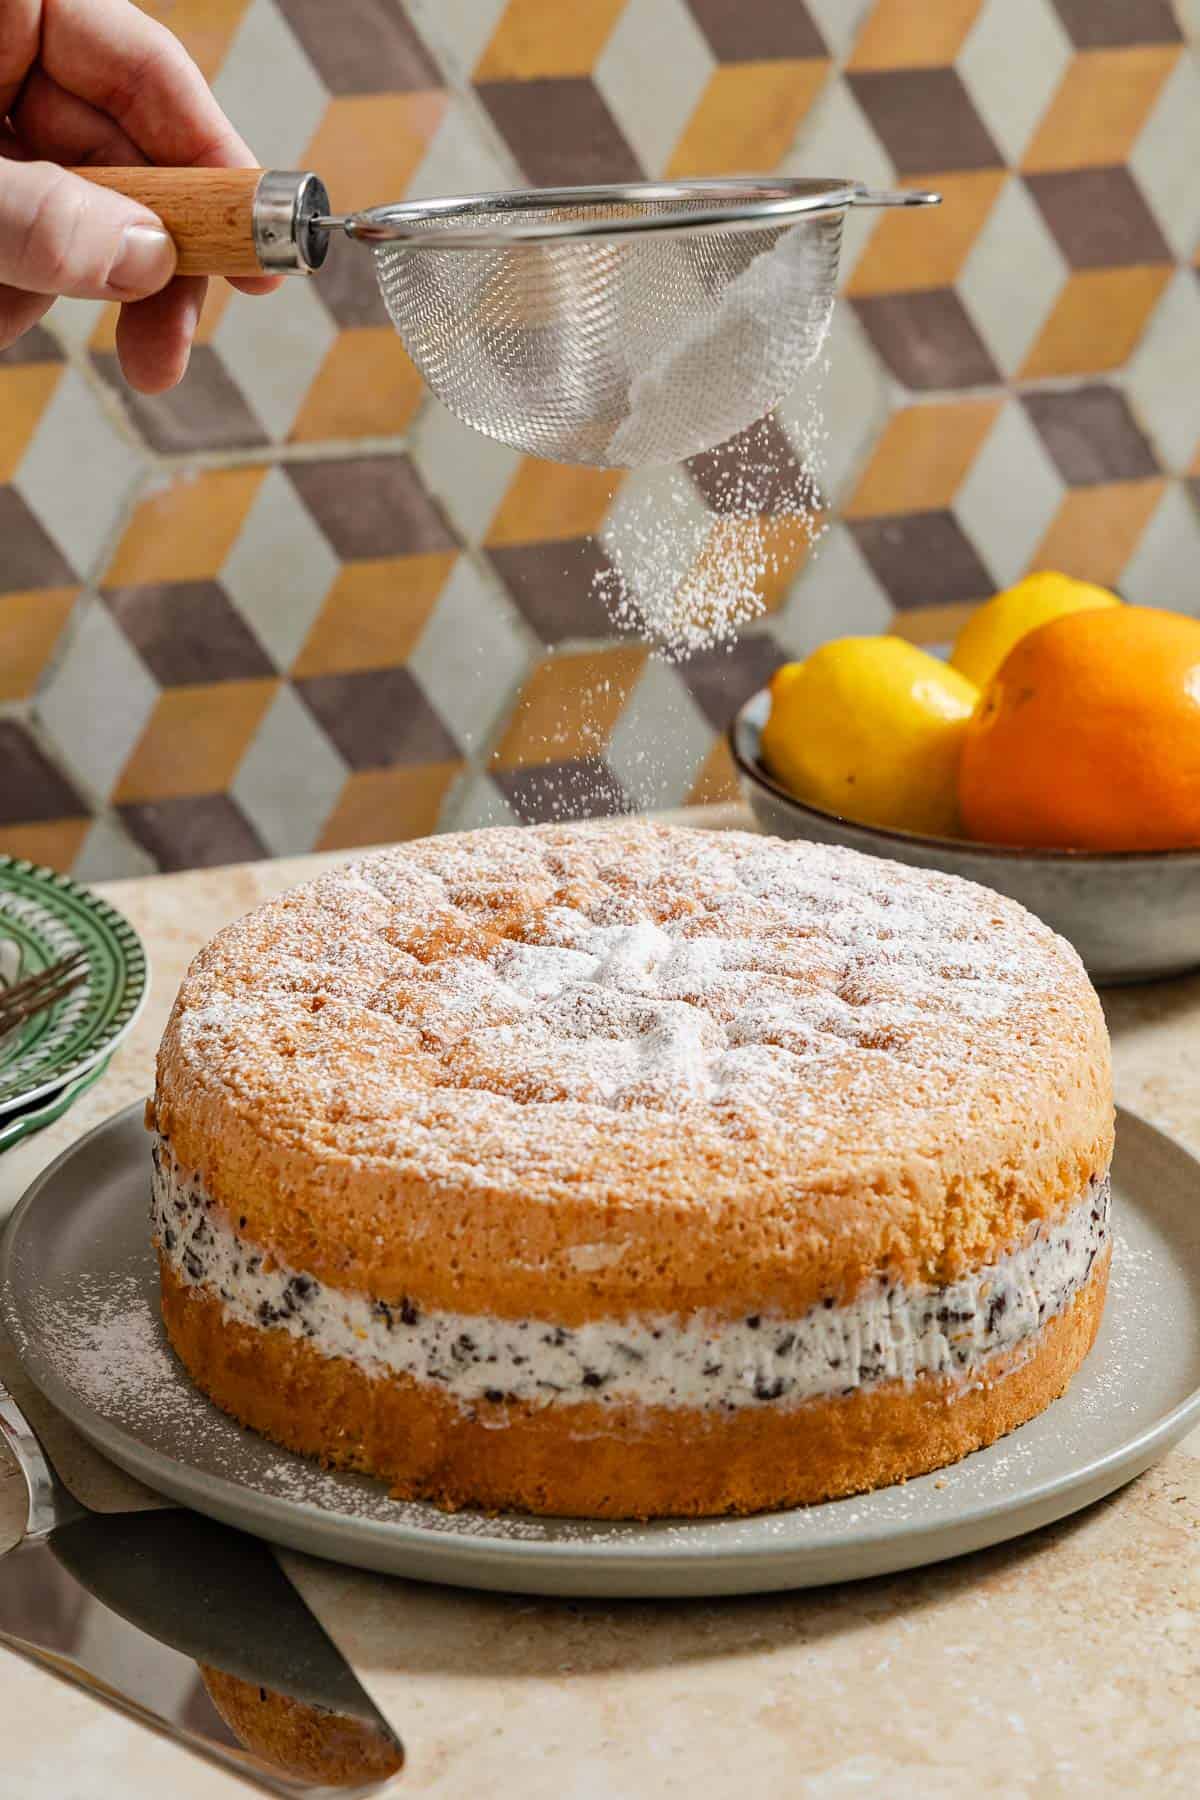 Powdered sugar being sprinkled on top of the easy cassata cake on a serving platter. Surrounding this is a stack of plates with forks and a bowl of citrus fruits.